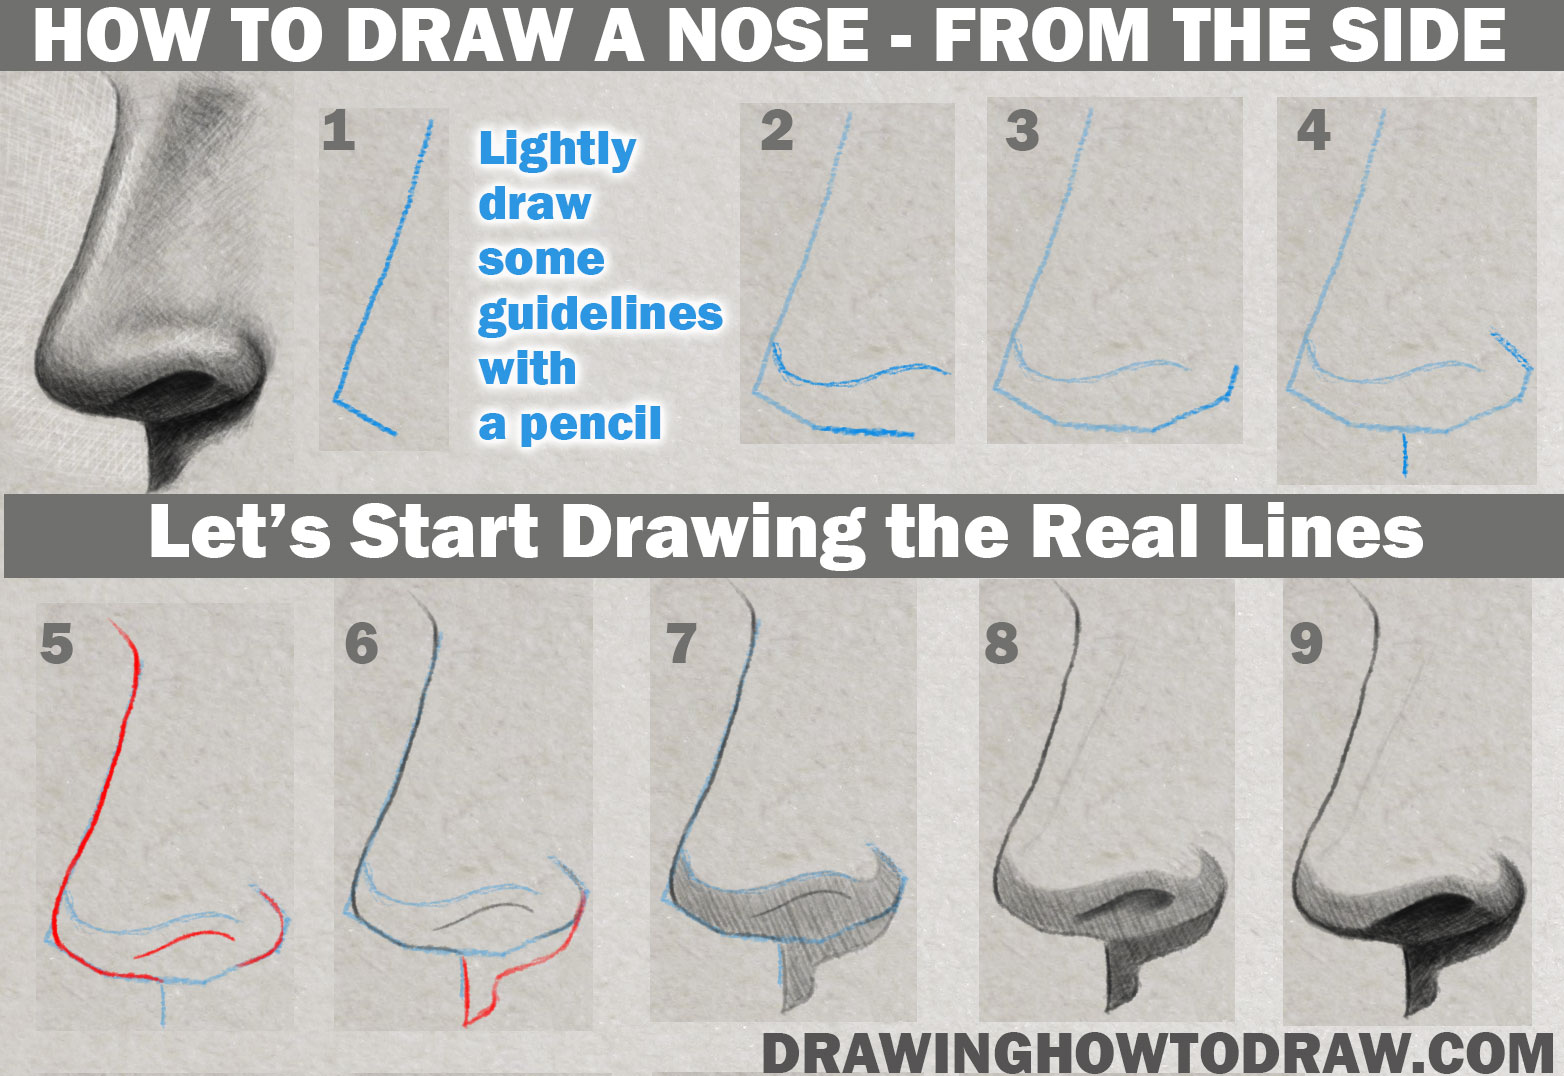 How to Draw a Nose - Life Drawing Academy